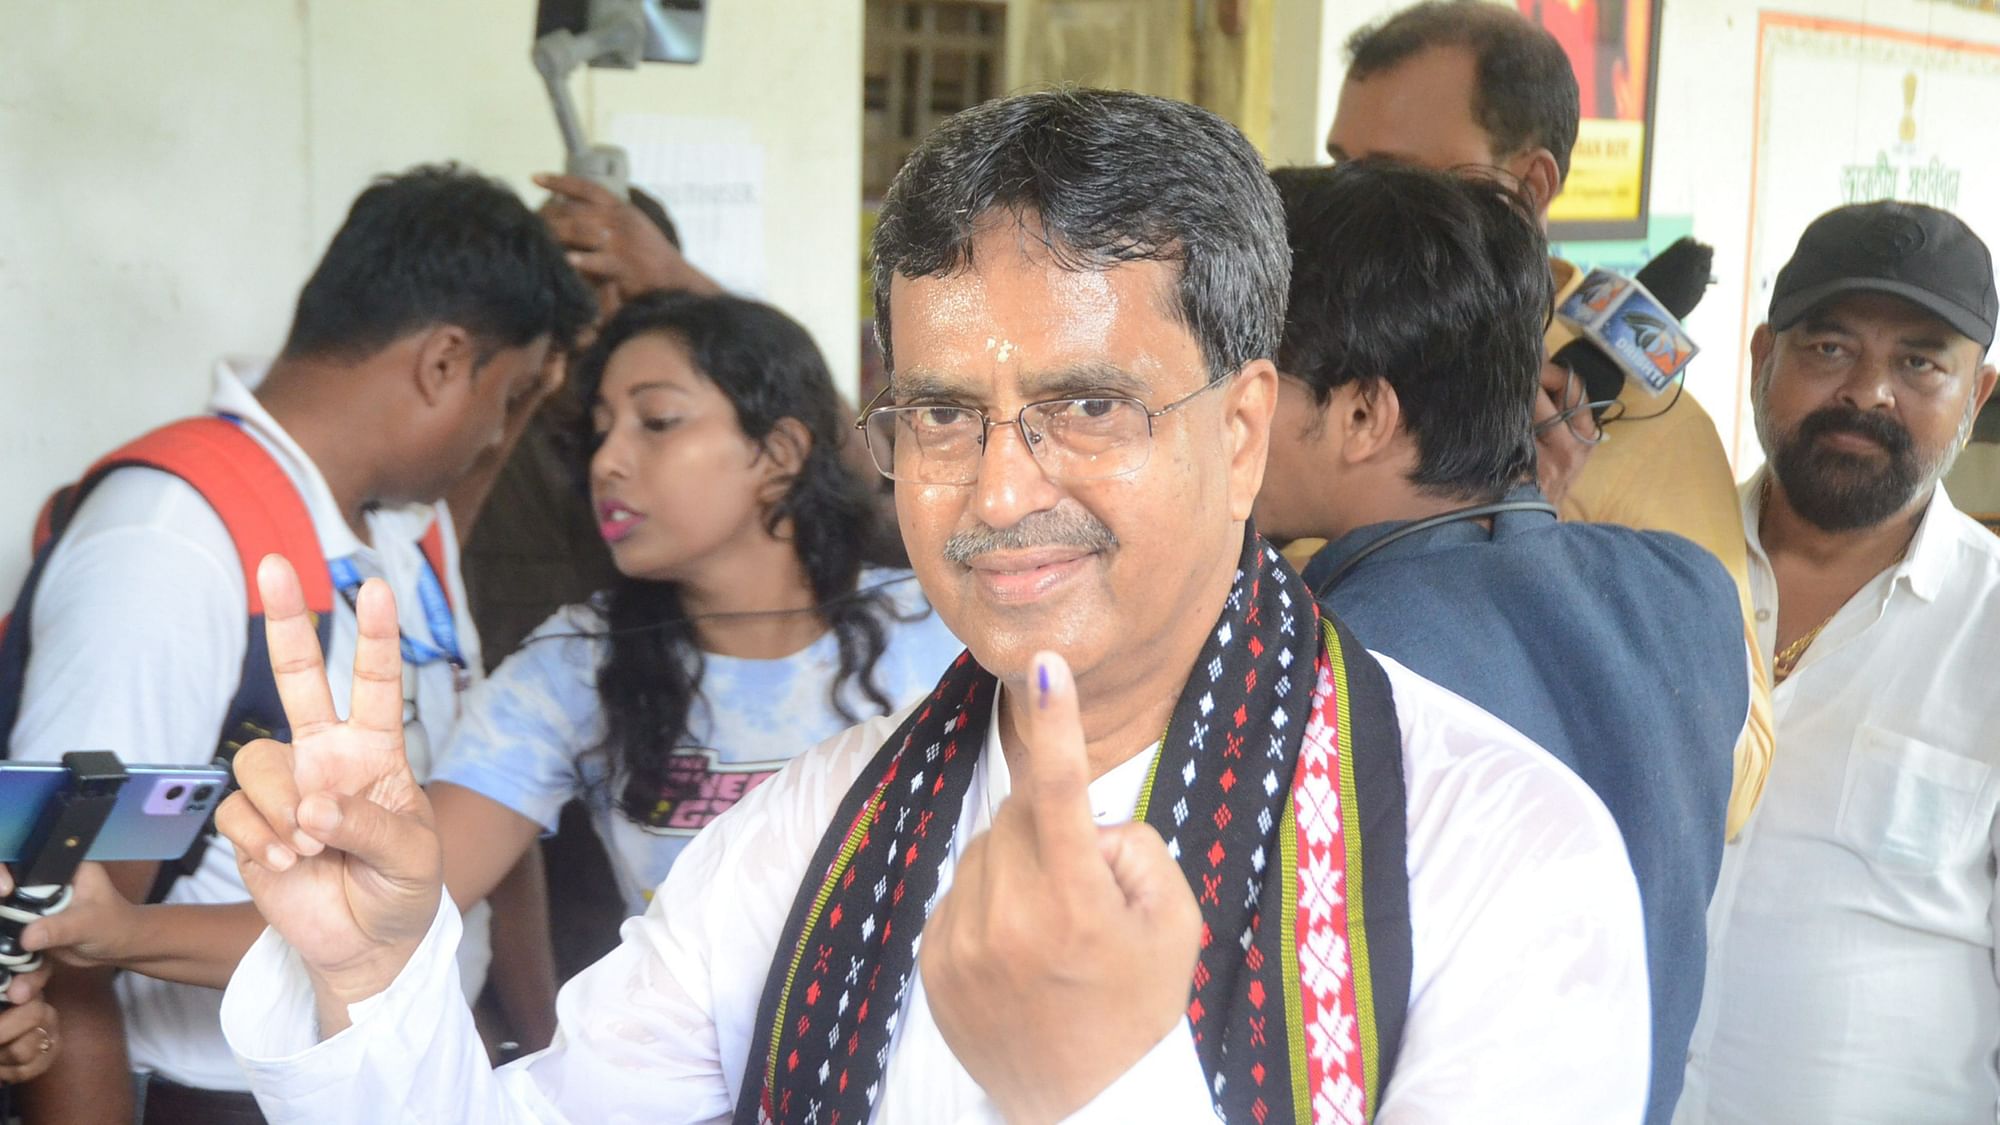 <div class="paragraphs"><p>Tripura Chief Minister Manik Saha poses for a photograph after casting his vote at a polling station.</p></div>